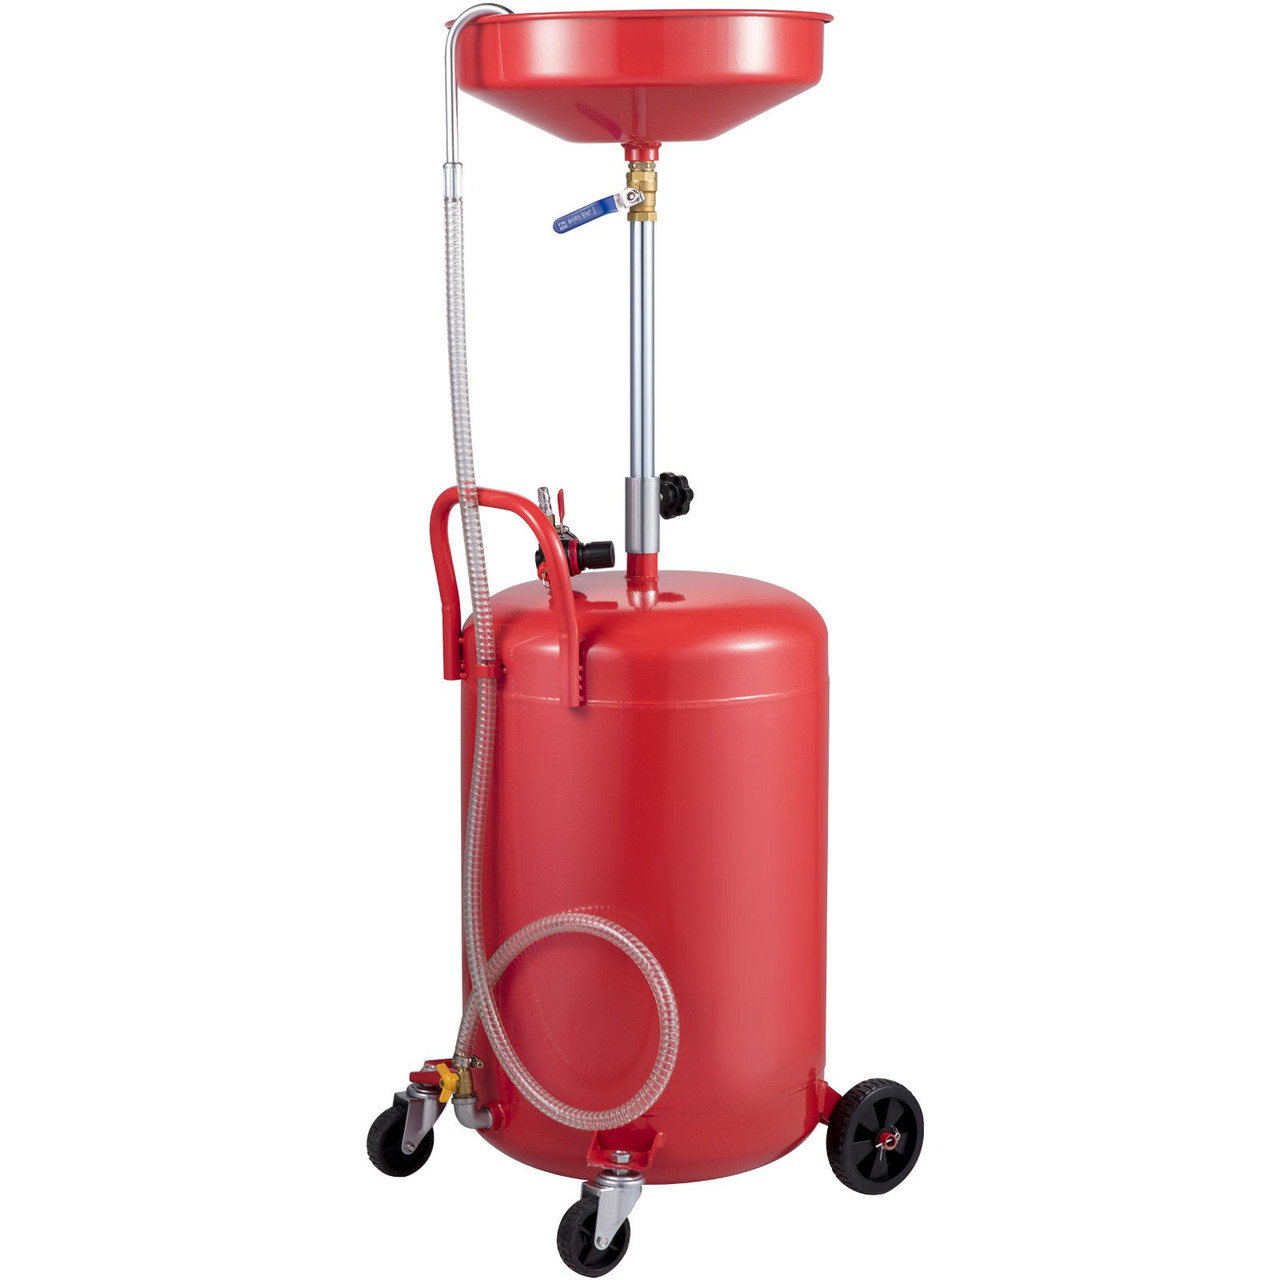 Waste Oil Drain Tank 20 Gallon Portable Oil Drain Air Operated Drainer Oil Change, Oil Drain Container, Fluid Fuel Transfer Drainage Adjustable Funnel Height, with Pressure Regulating Valve